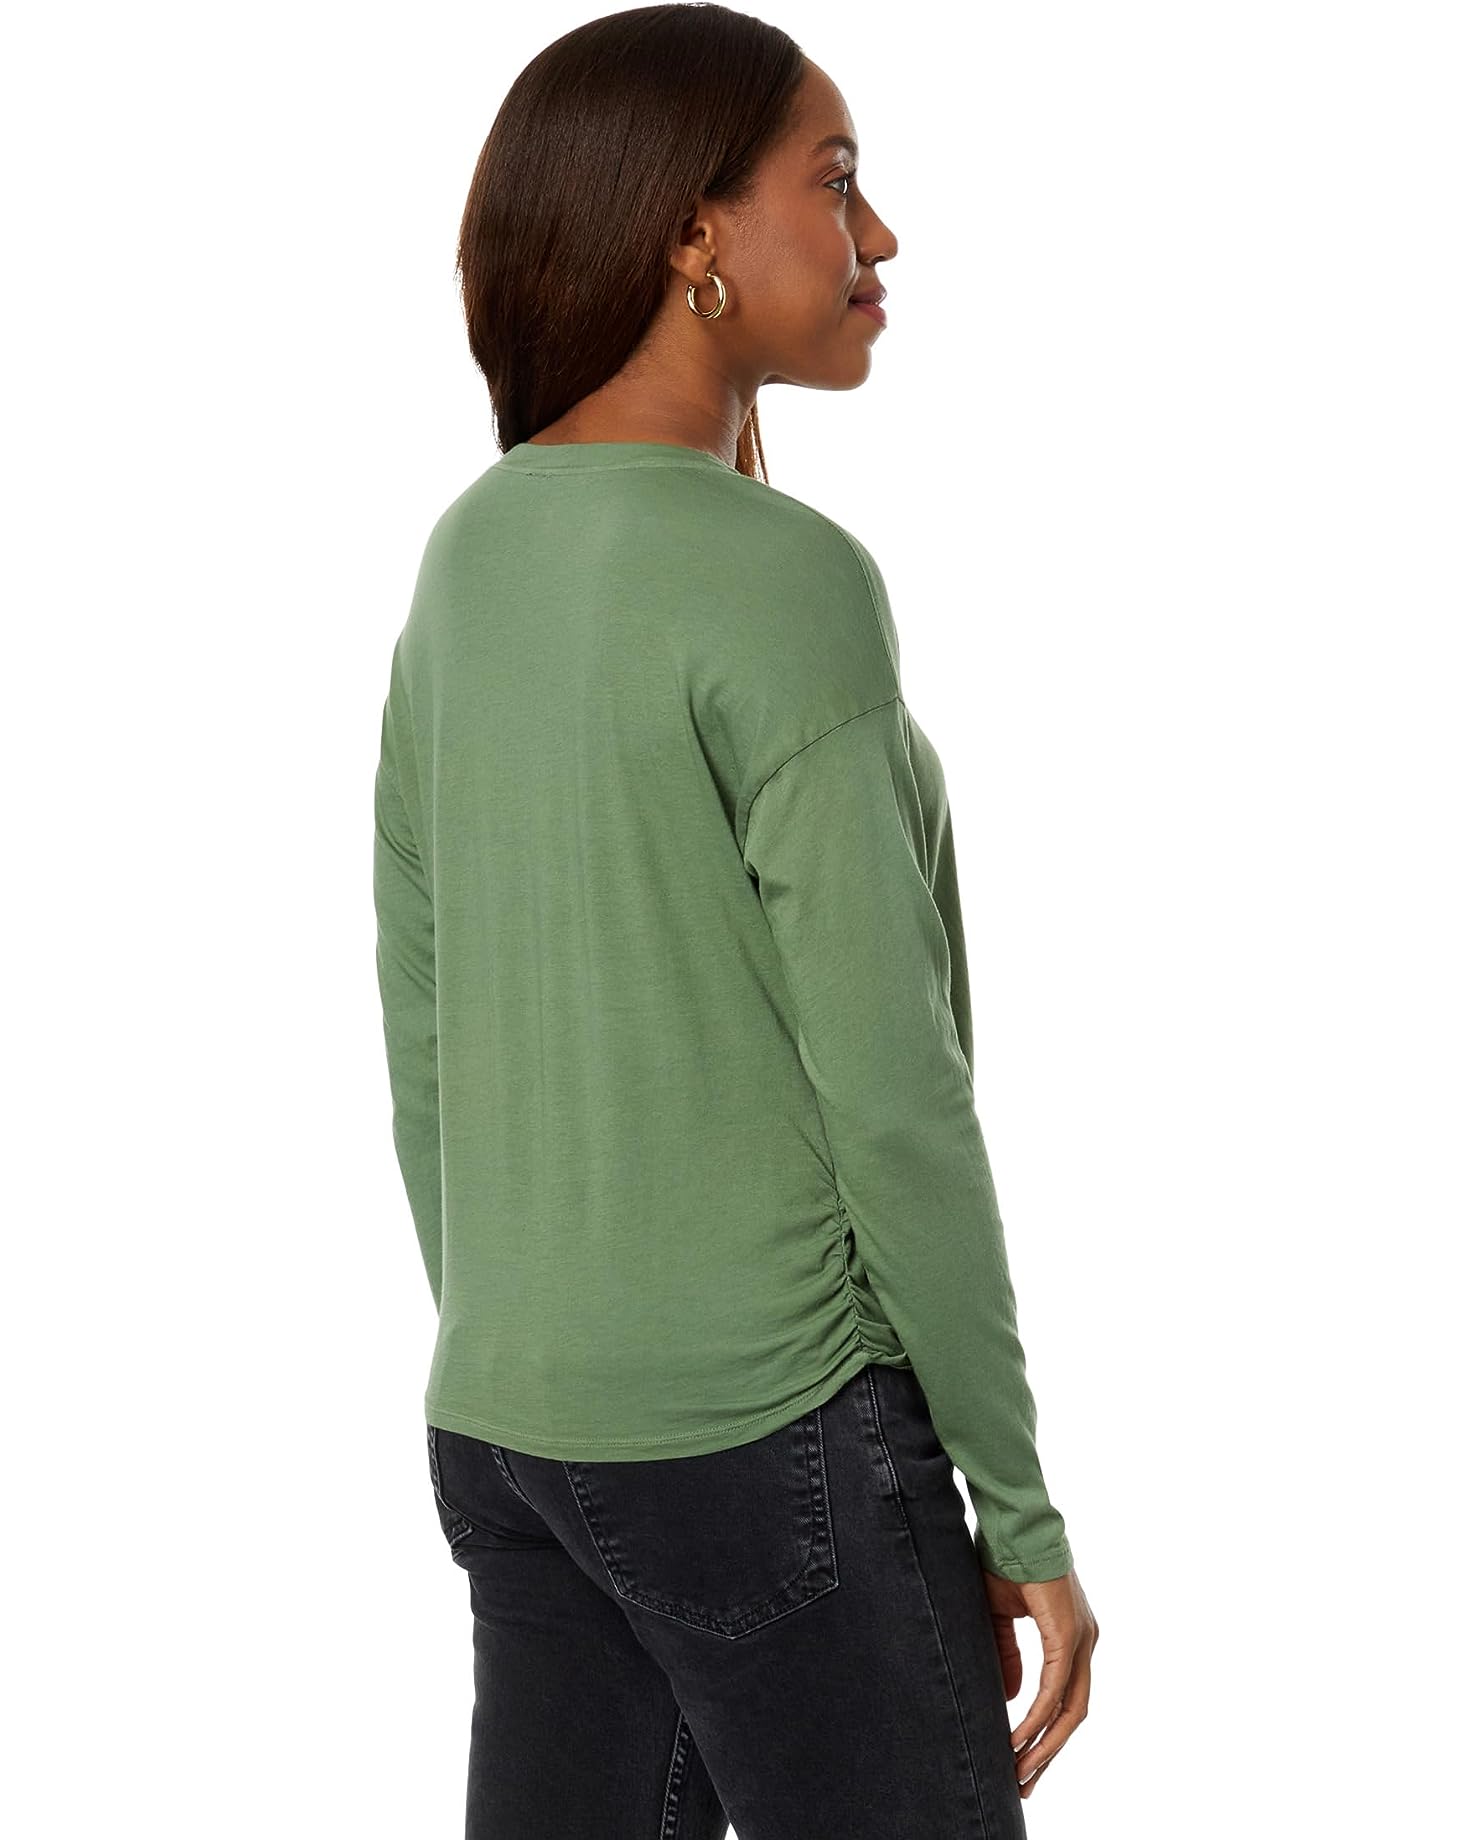 Knot Front Detail Long Sleeve Top in Sprout-Veri Peri